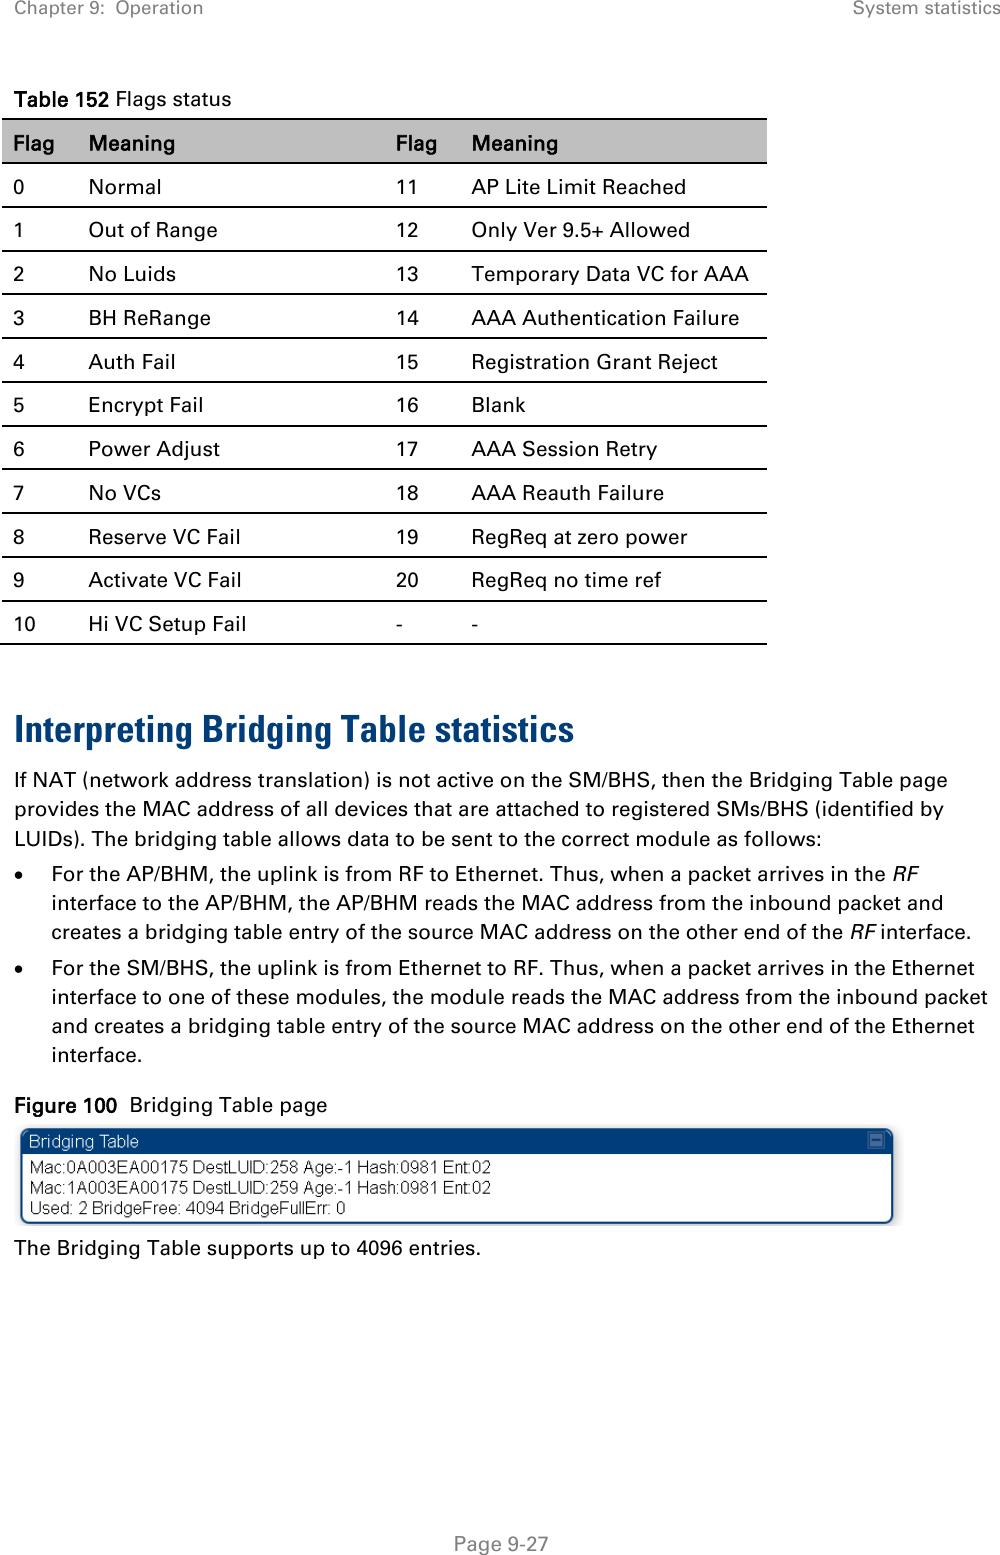 Chapter 9:  Operation System statistics   Page 9-27 Table 152 Flags status Flag Meaning Flag Meaning 0  Normal 11 AP Lite Limit Reached 1  Out of Range 12 Only Ver 9.5+ Allowed 2  No Luids 13 Temporary Data VC for AAA 3  BH ReRange 14 AAA Authentication Failure 4  Auth Fail  15  Registration Grant Reject 5  Encrypt Fail 16 Blank 6  Power Adjust 17 AAA Session Retry 7  No VCs 18 AAA Reauth Failure 8  Reserve VC Fail 19 RegReq at zero power 9  Activate VC Fail 20 RegReq no time ref 10 Hi VC Setup Fail  -  -  Interpreting Bridging Table statistics If NAT (network address translation) is not active on the SM/BHS, then the Bridging Table page provides the MAC address of all devices that are attached to registered SMs/BHS (identified by LUIDs). The bridging table allows data to be sent to the correct module as follows: • For the AP/BHM, the uplink is from RF to Ethernet. Thus, when a packet arrives in the RF interface to the AP/BHM, the AP/BHM reads the MAC address from the inbound packet and creates a bridging table entry of the source MAC address on the other end of the RF interface. • For the SM/BHS, the uplink is from Ethernet to RF. Thus, when a packet arrives in the Ethernet interface to one of these modules, the module reads the MAC address from the inbound packet and creates a bridging table entry of the source MAC address on the other end of the Ethernet interface. Figure 100  Bridging Table page  The Bridging Table supports up to 4096 entries. 